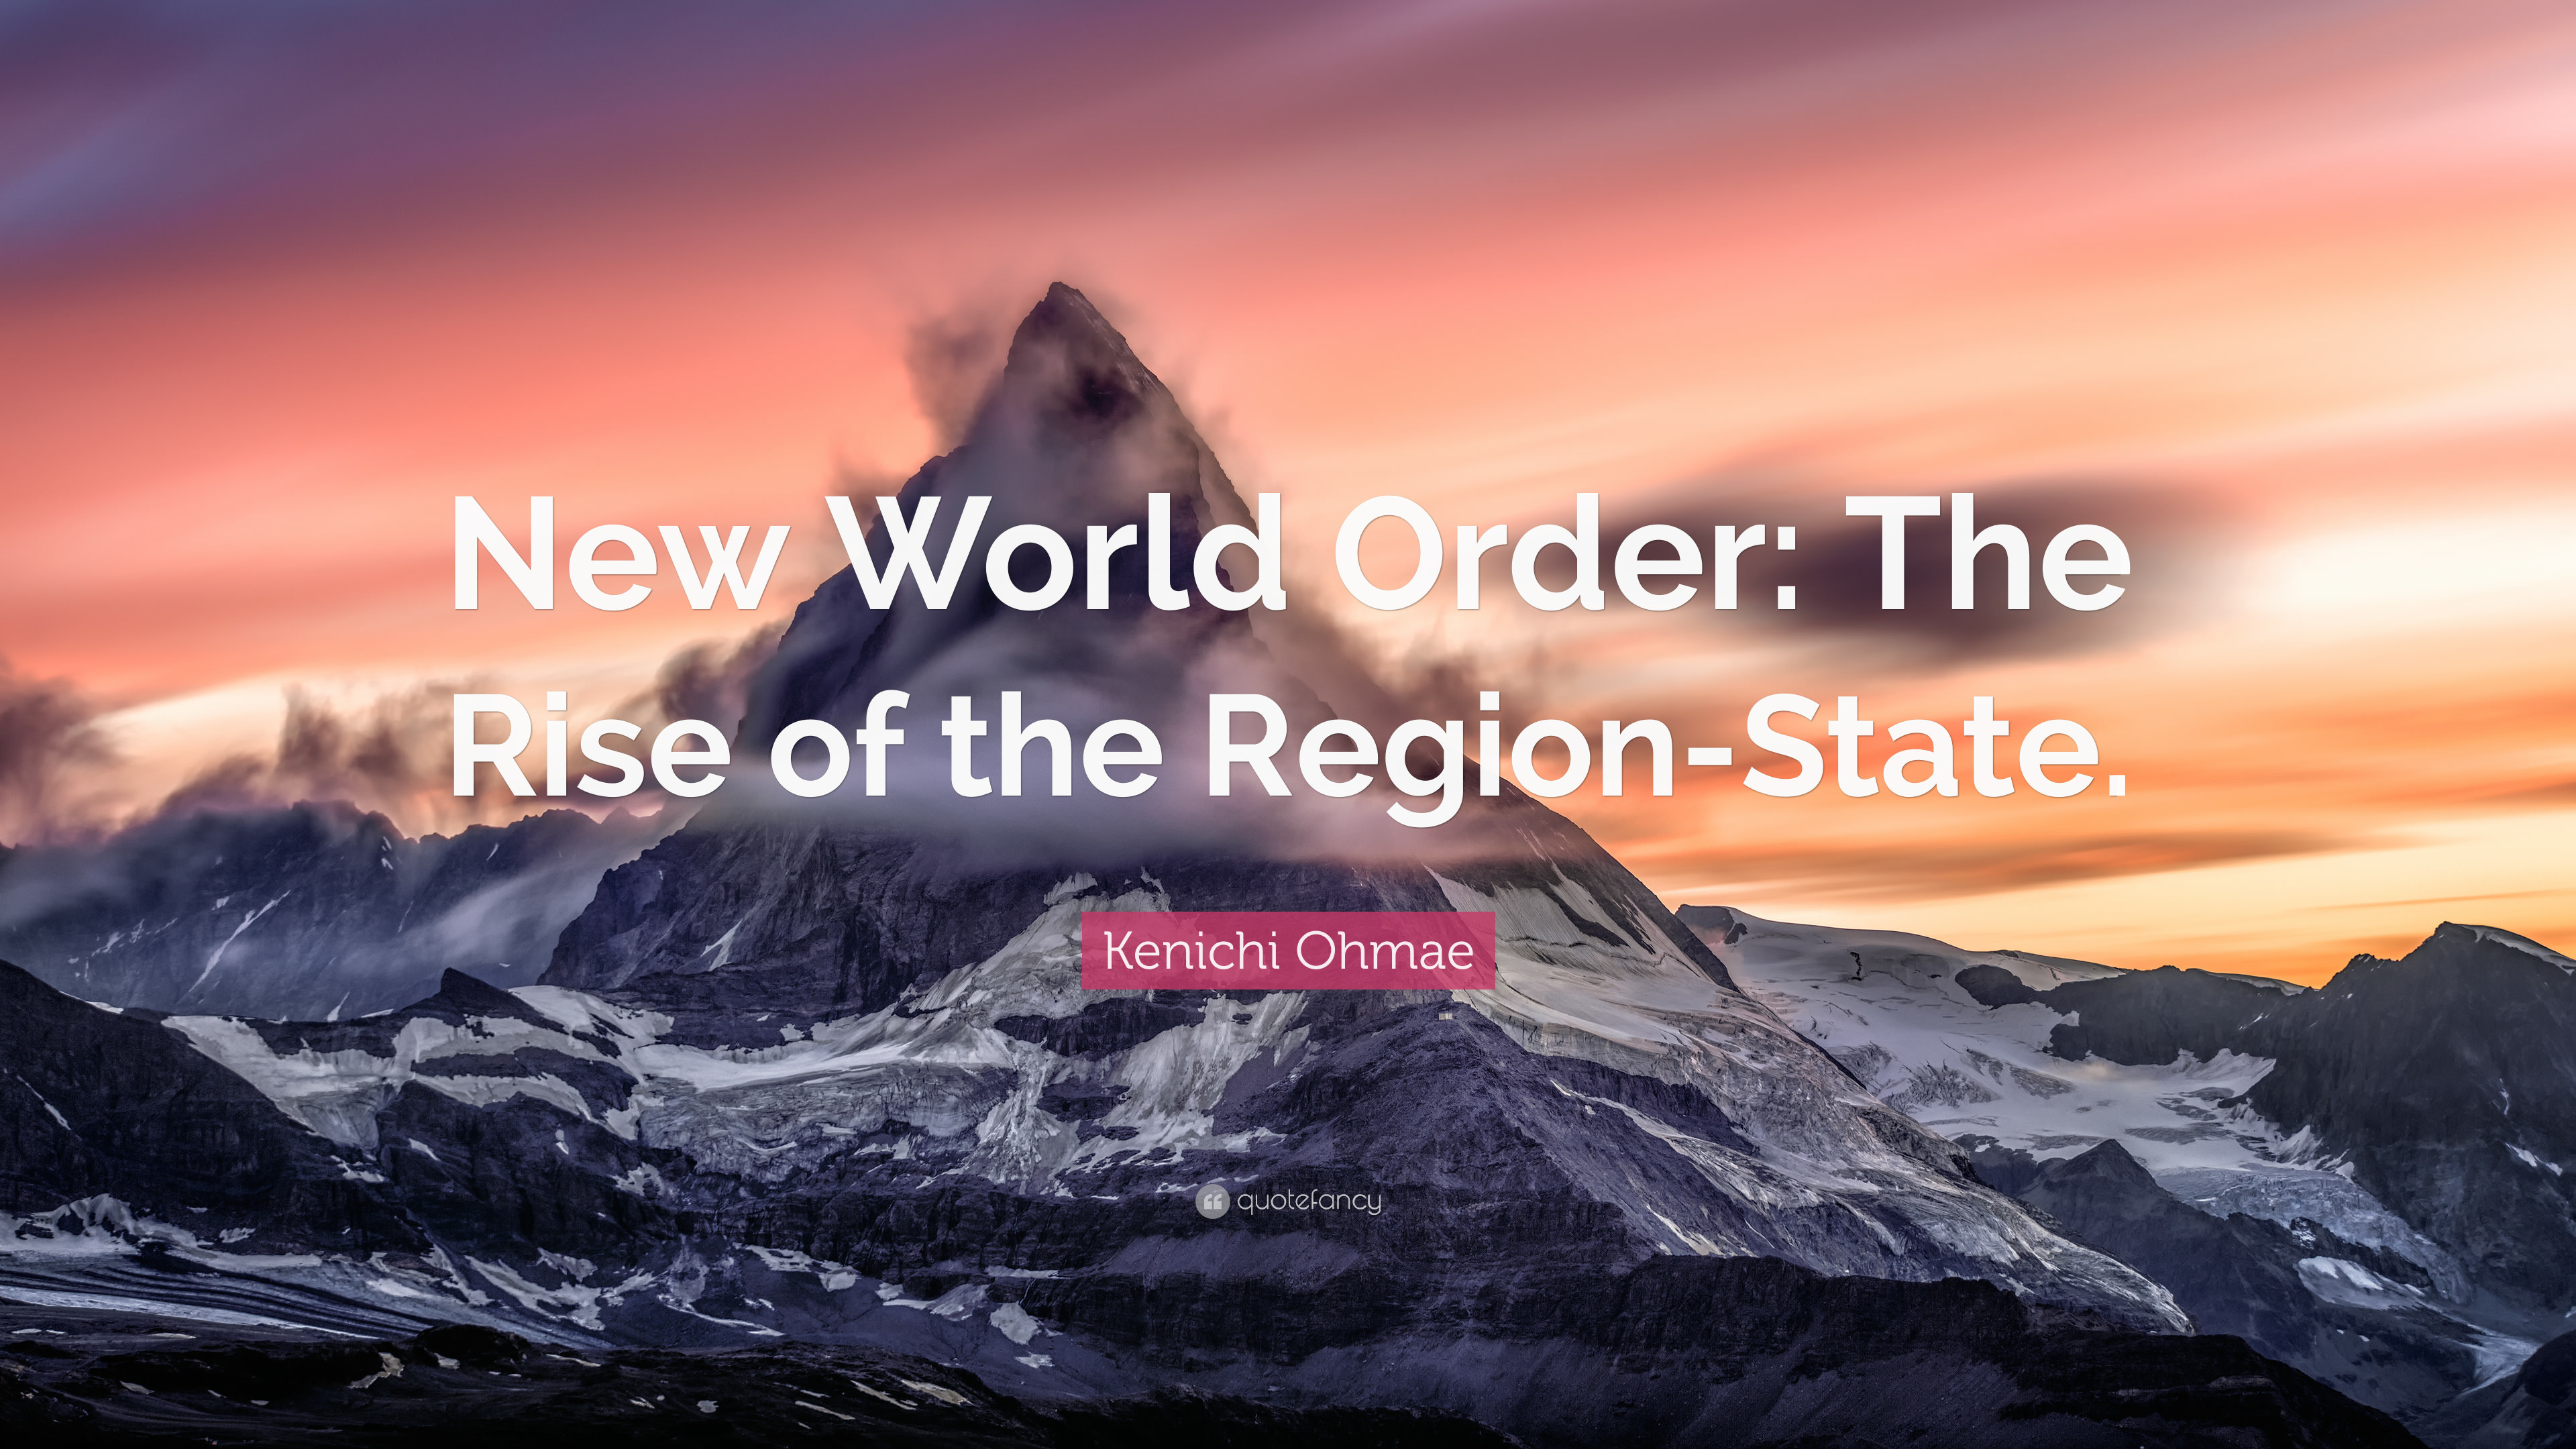 3840x2160 Kenichi Ohmae Quote: “New World Order: The Rise of the Region-State